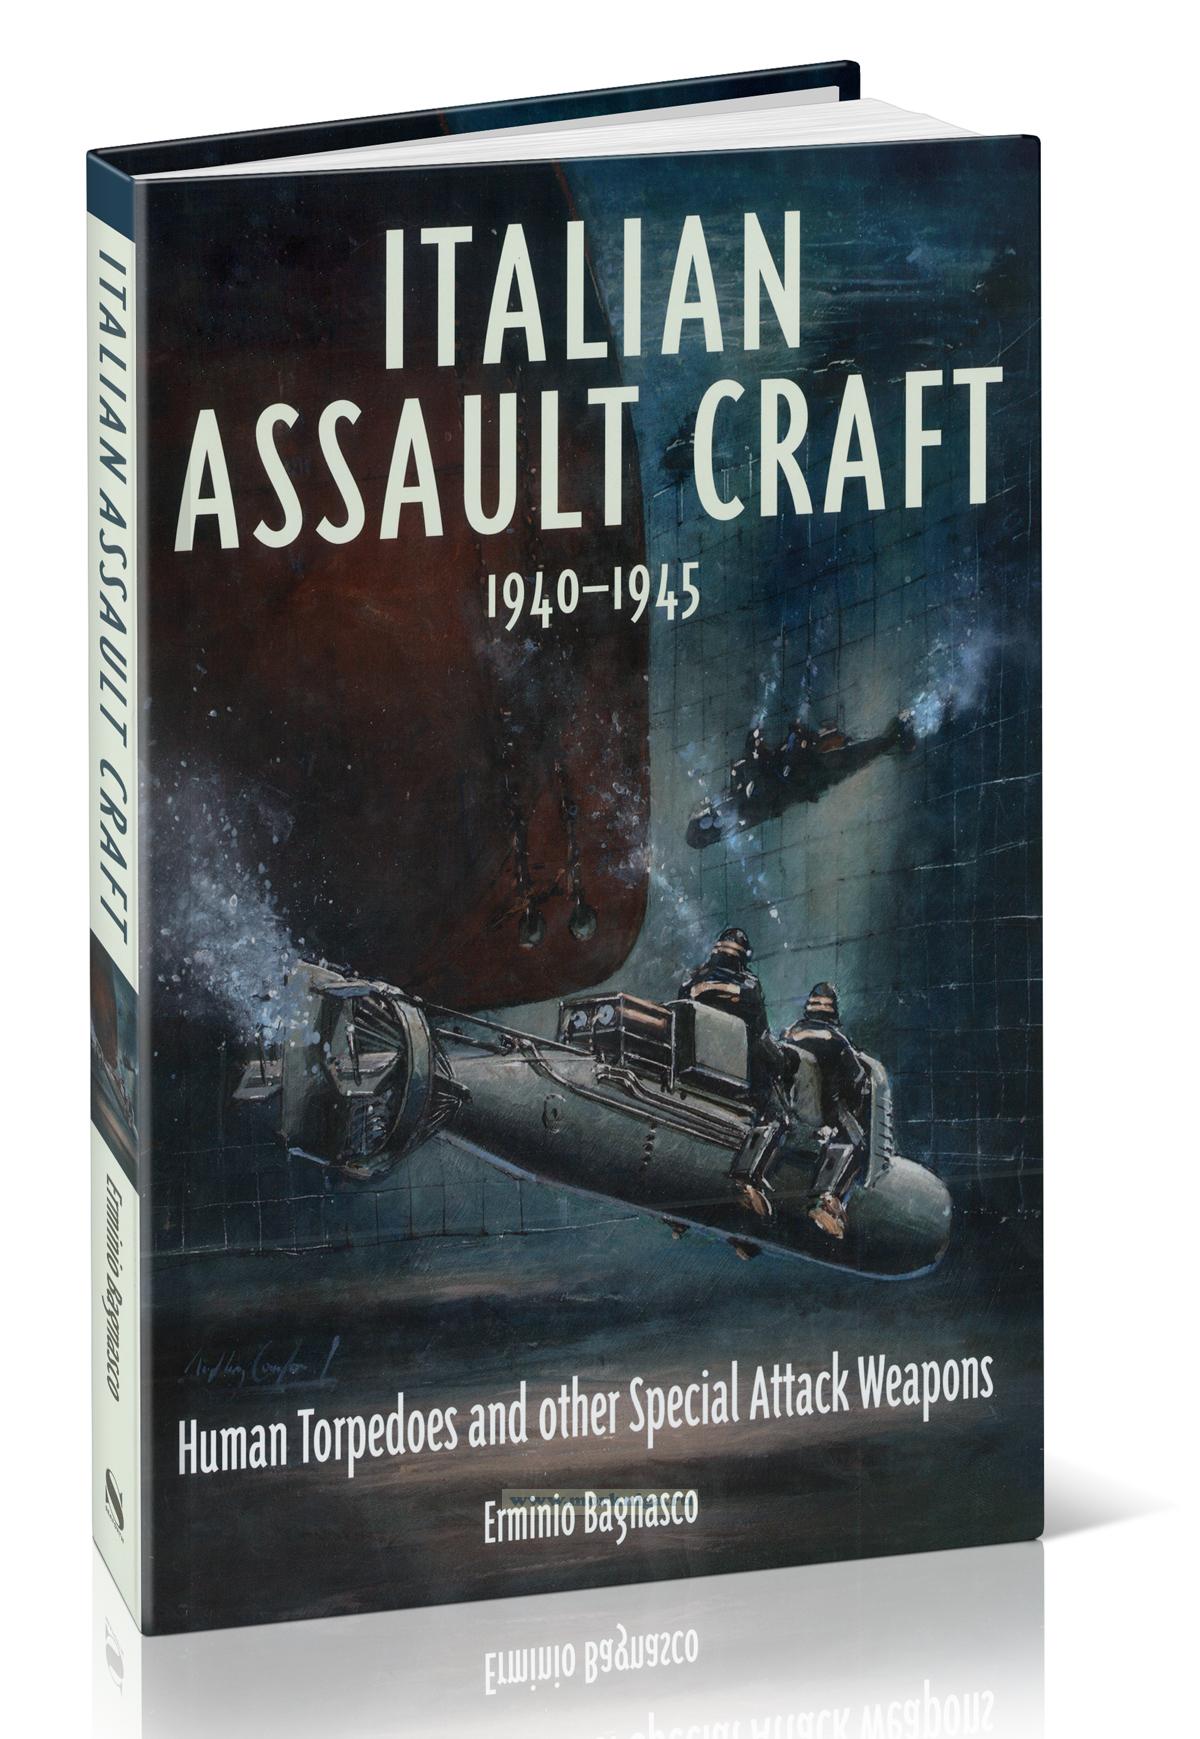 Italian Assault Craft, 1940-1945. Human Torpedoes and other Special Attack Weapons